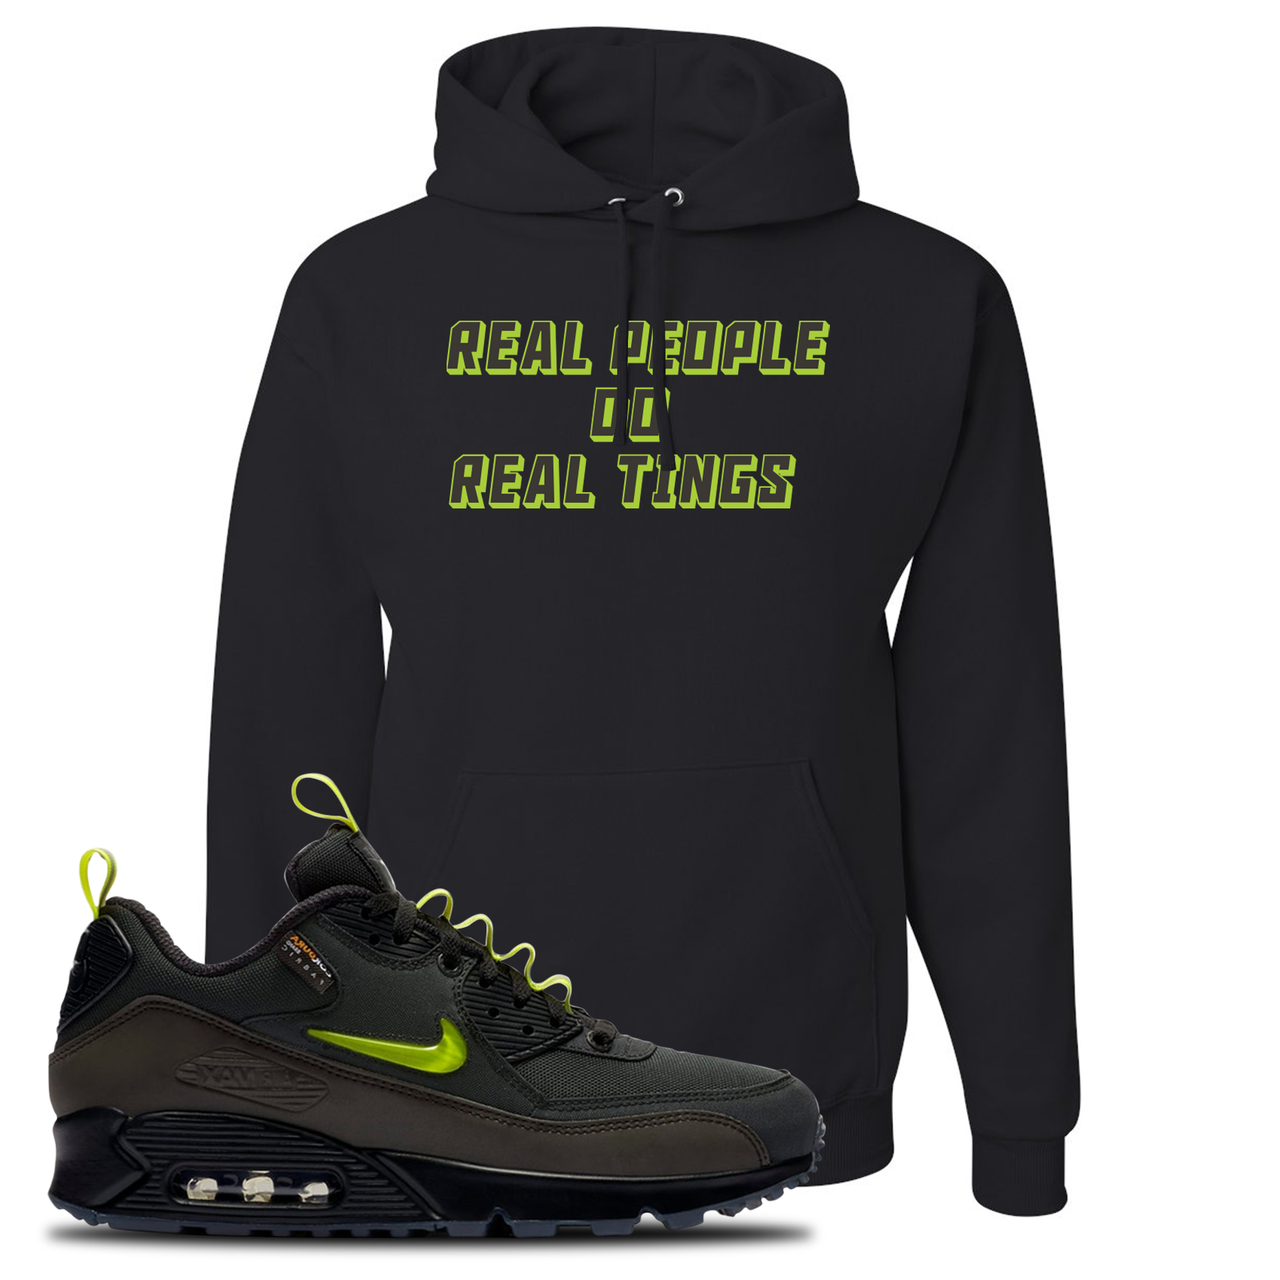 The Basement X Air Max 90 Manchester Real People Do Real Things Black Sneaker Hook Up Pullover Hoodie